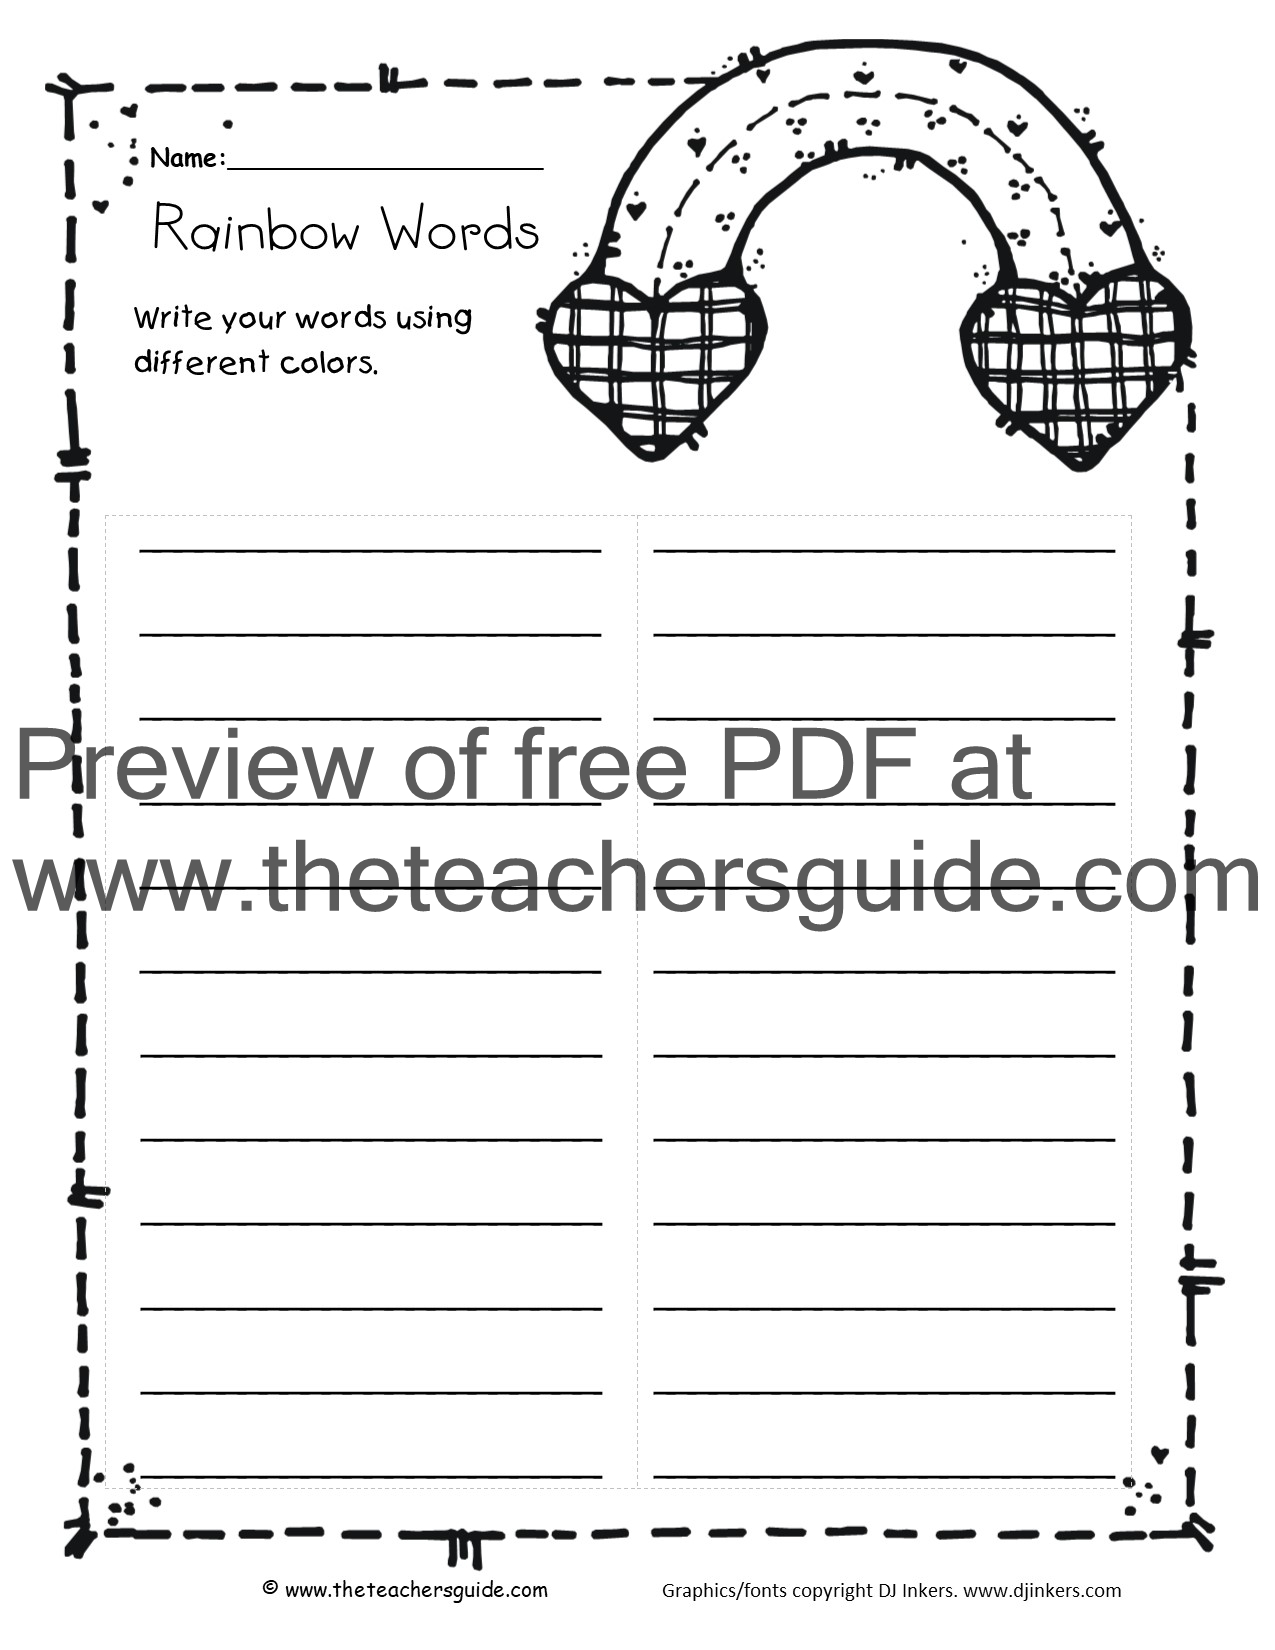 free-teacher-answer-key-and-the-worksheets-for-preschool-kids-with-speech-problem